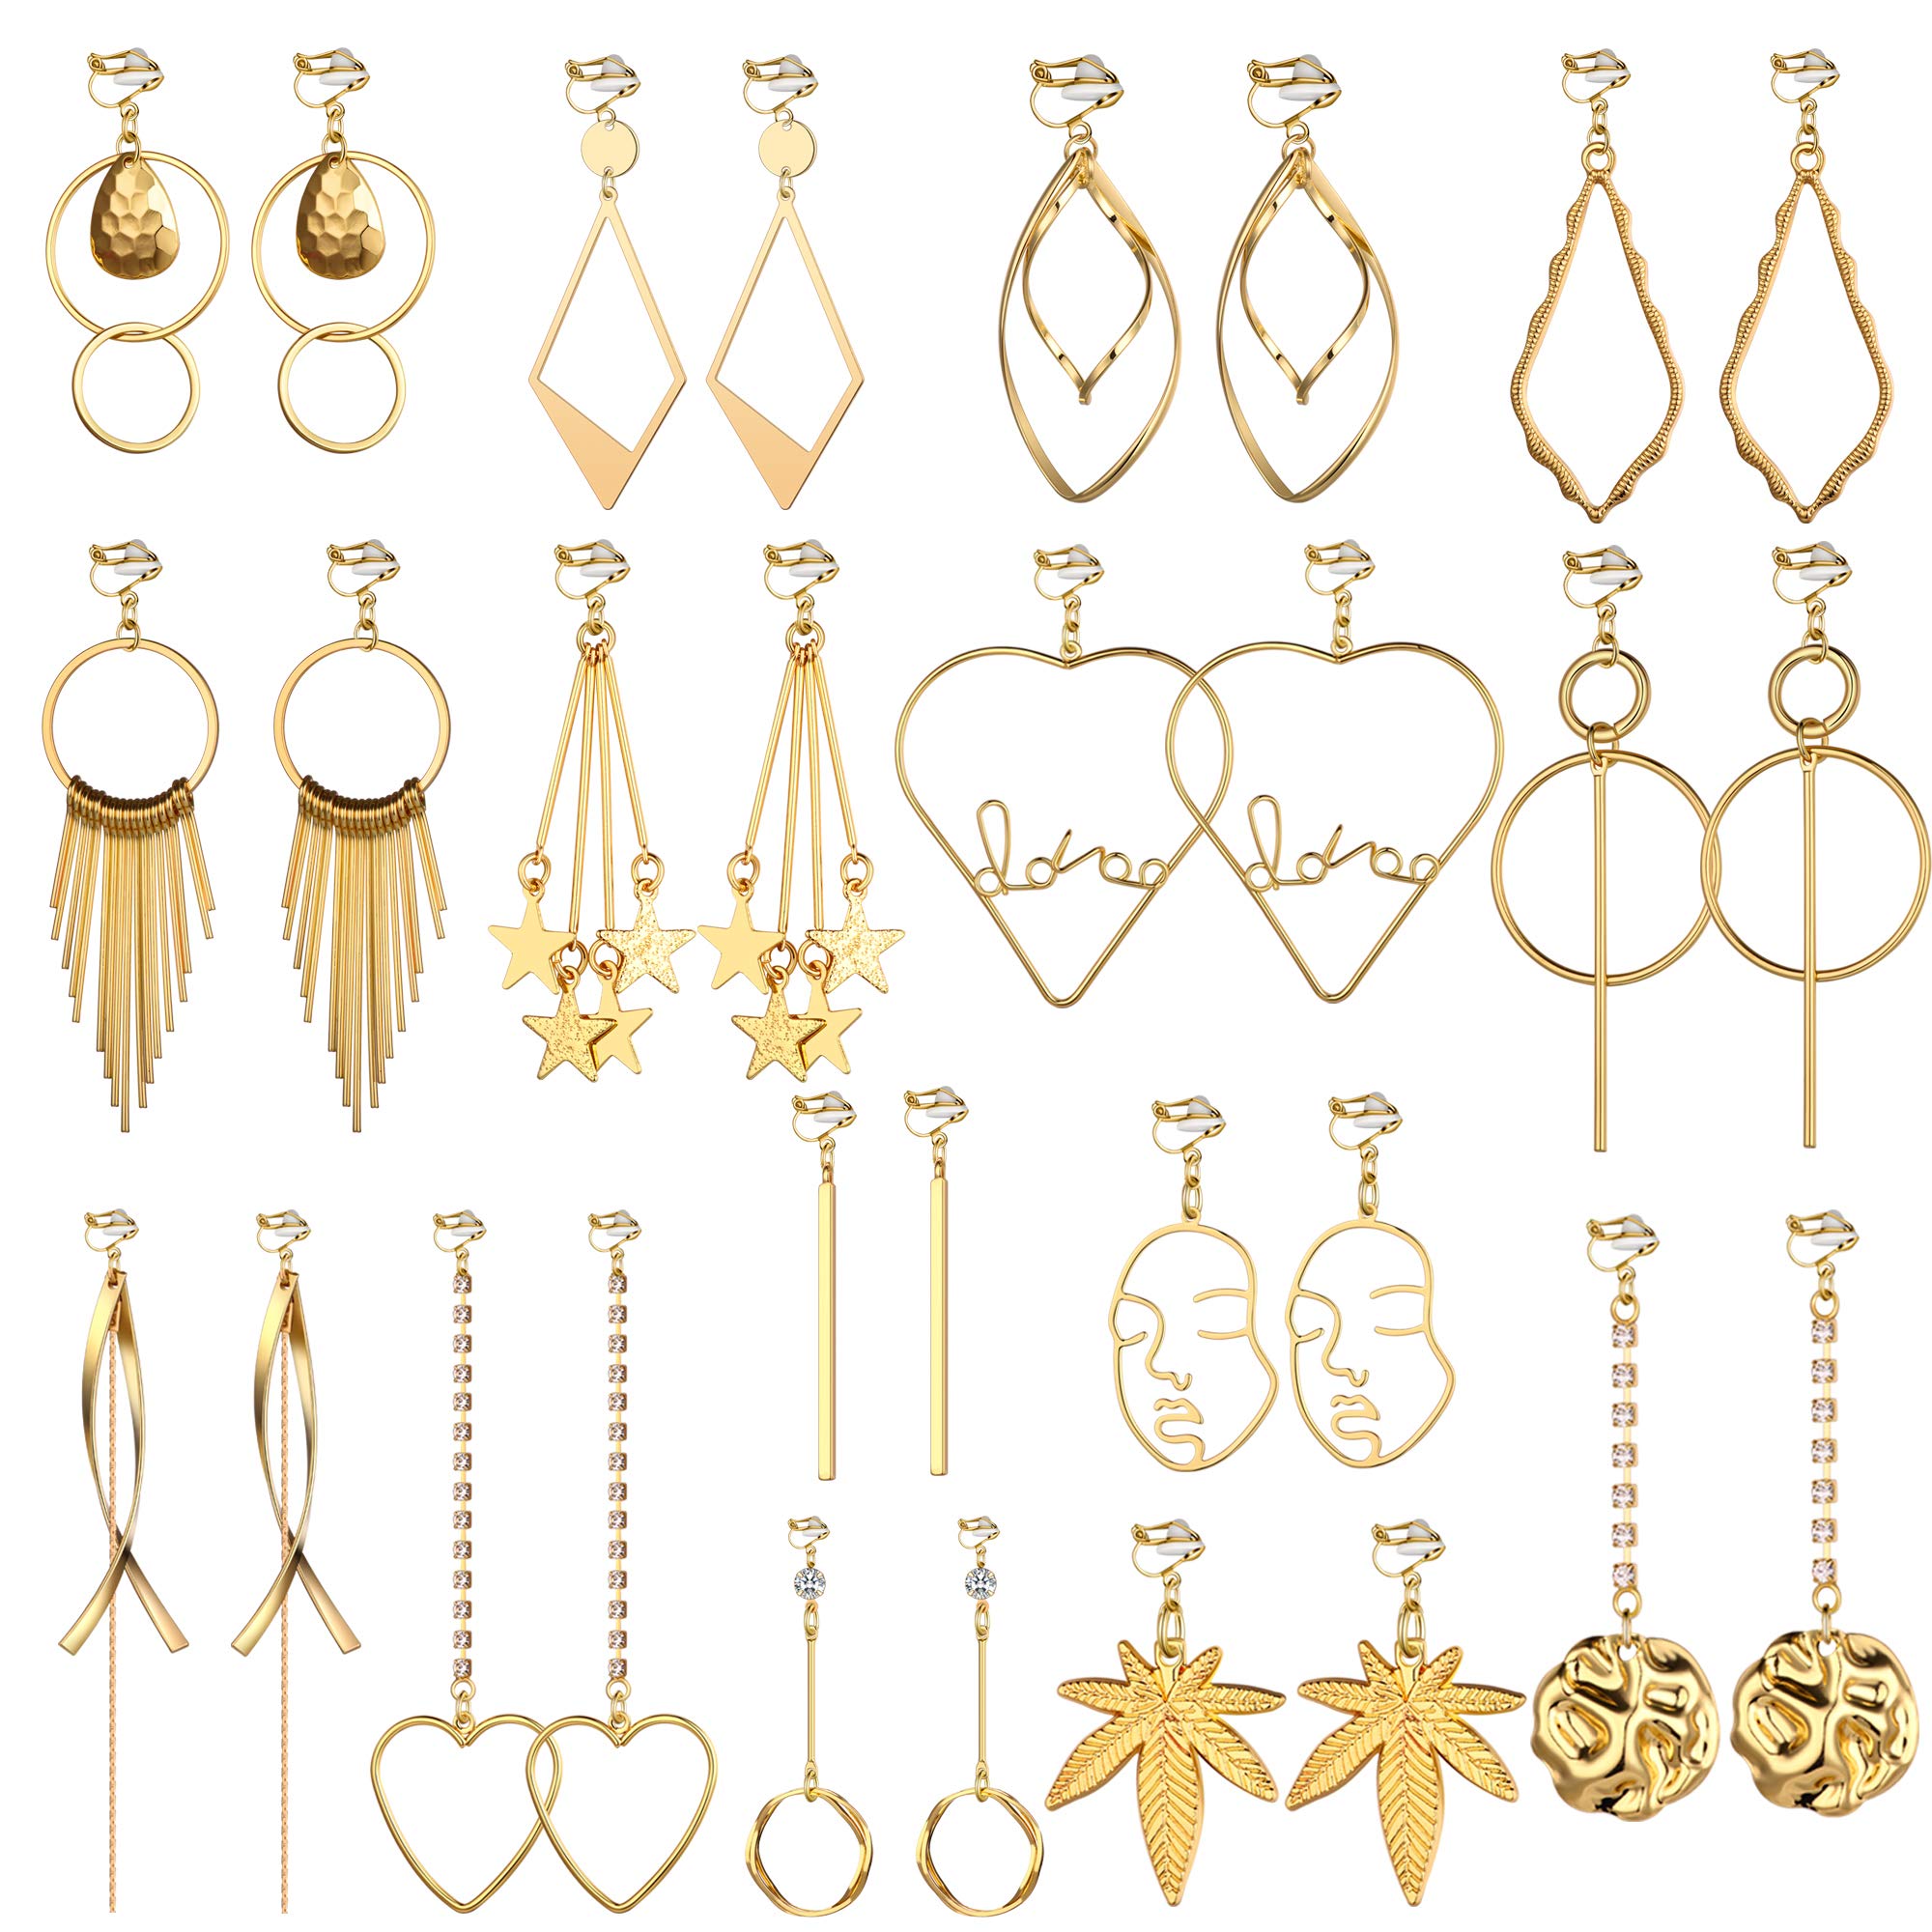 Aganippe 15 Pairs Clip on Earrings for Women